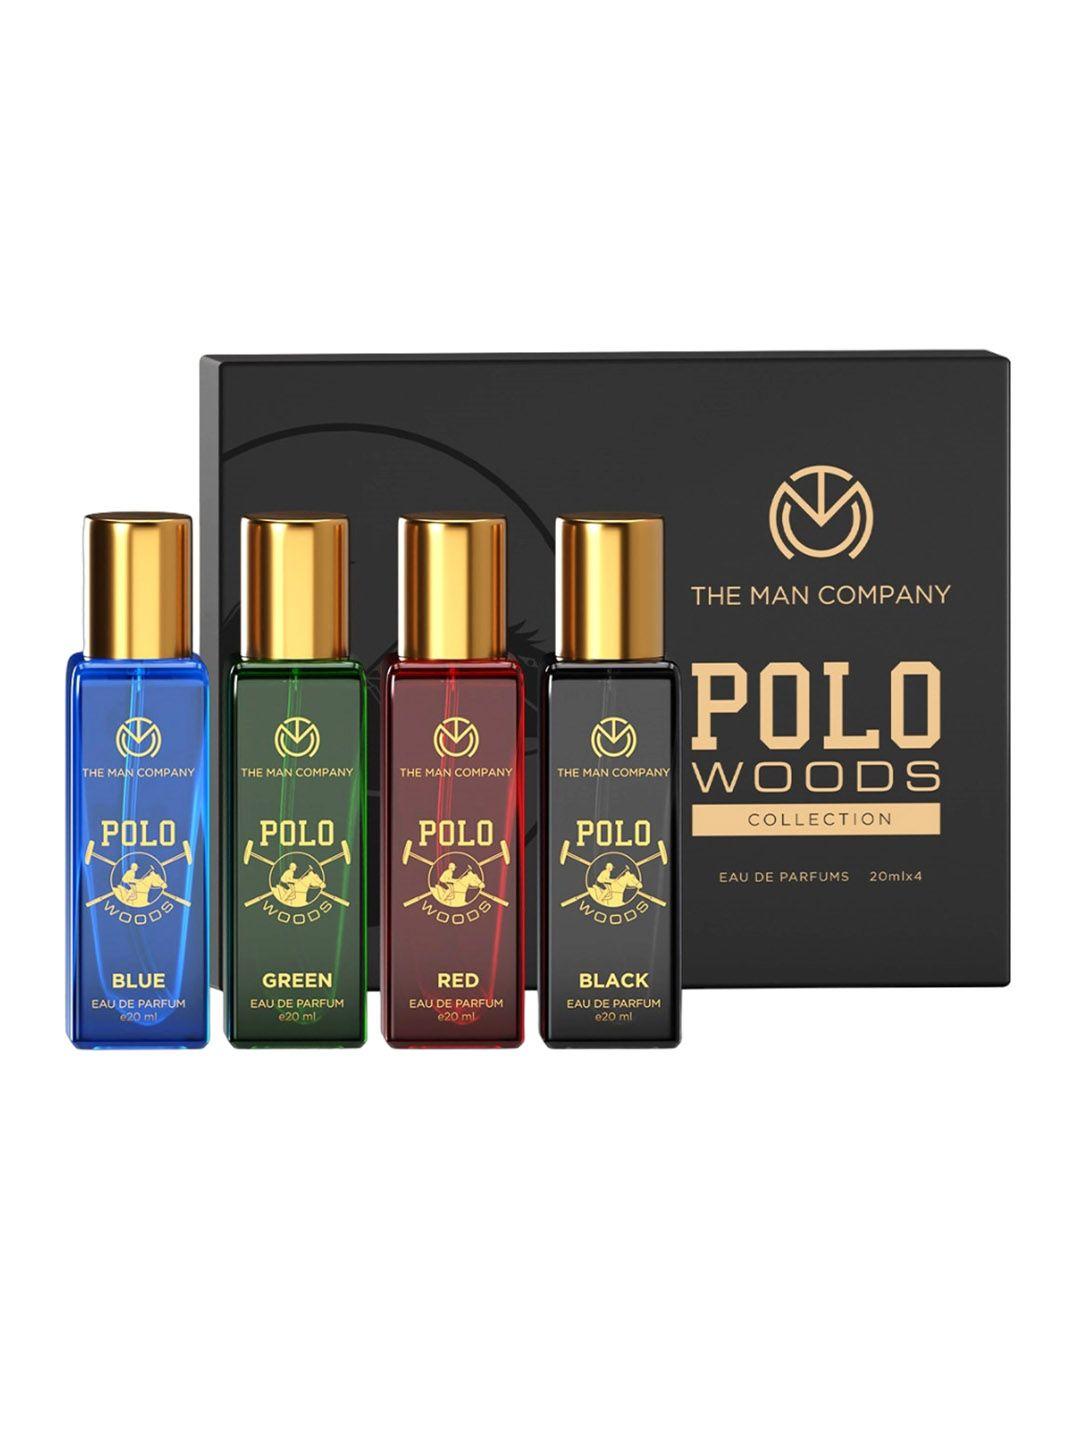 the man company polo woods collection perfume gift set - 20 ml each